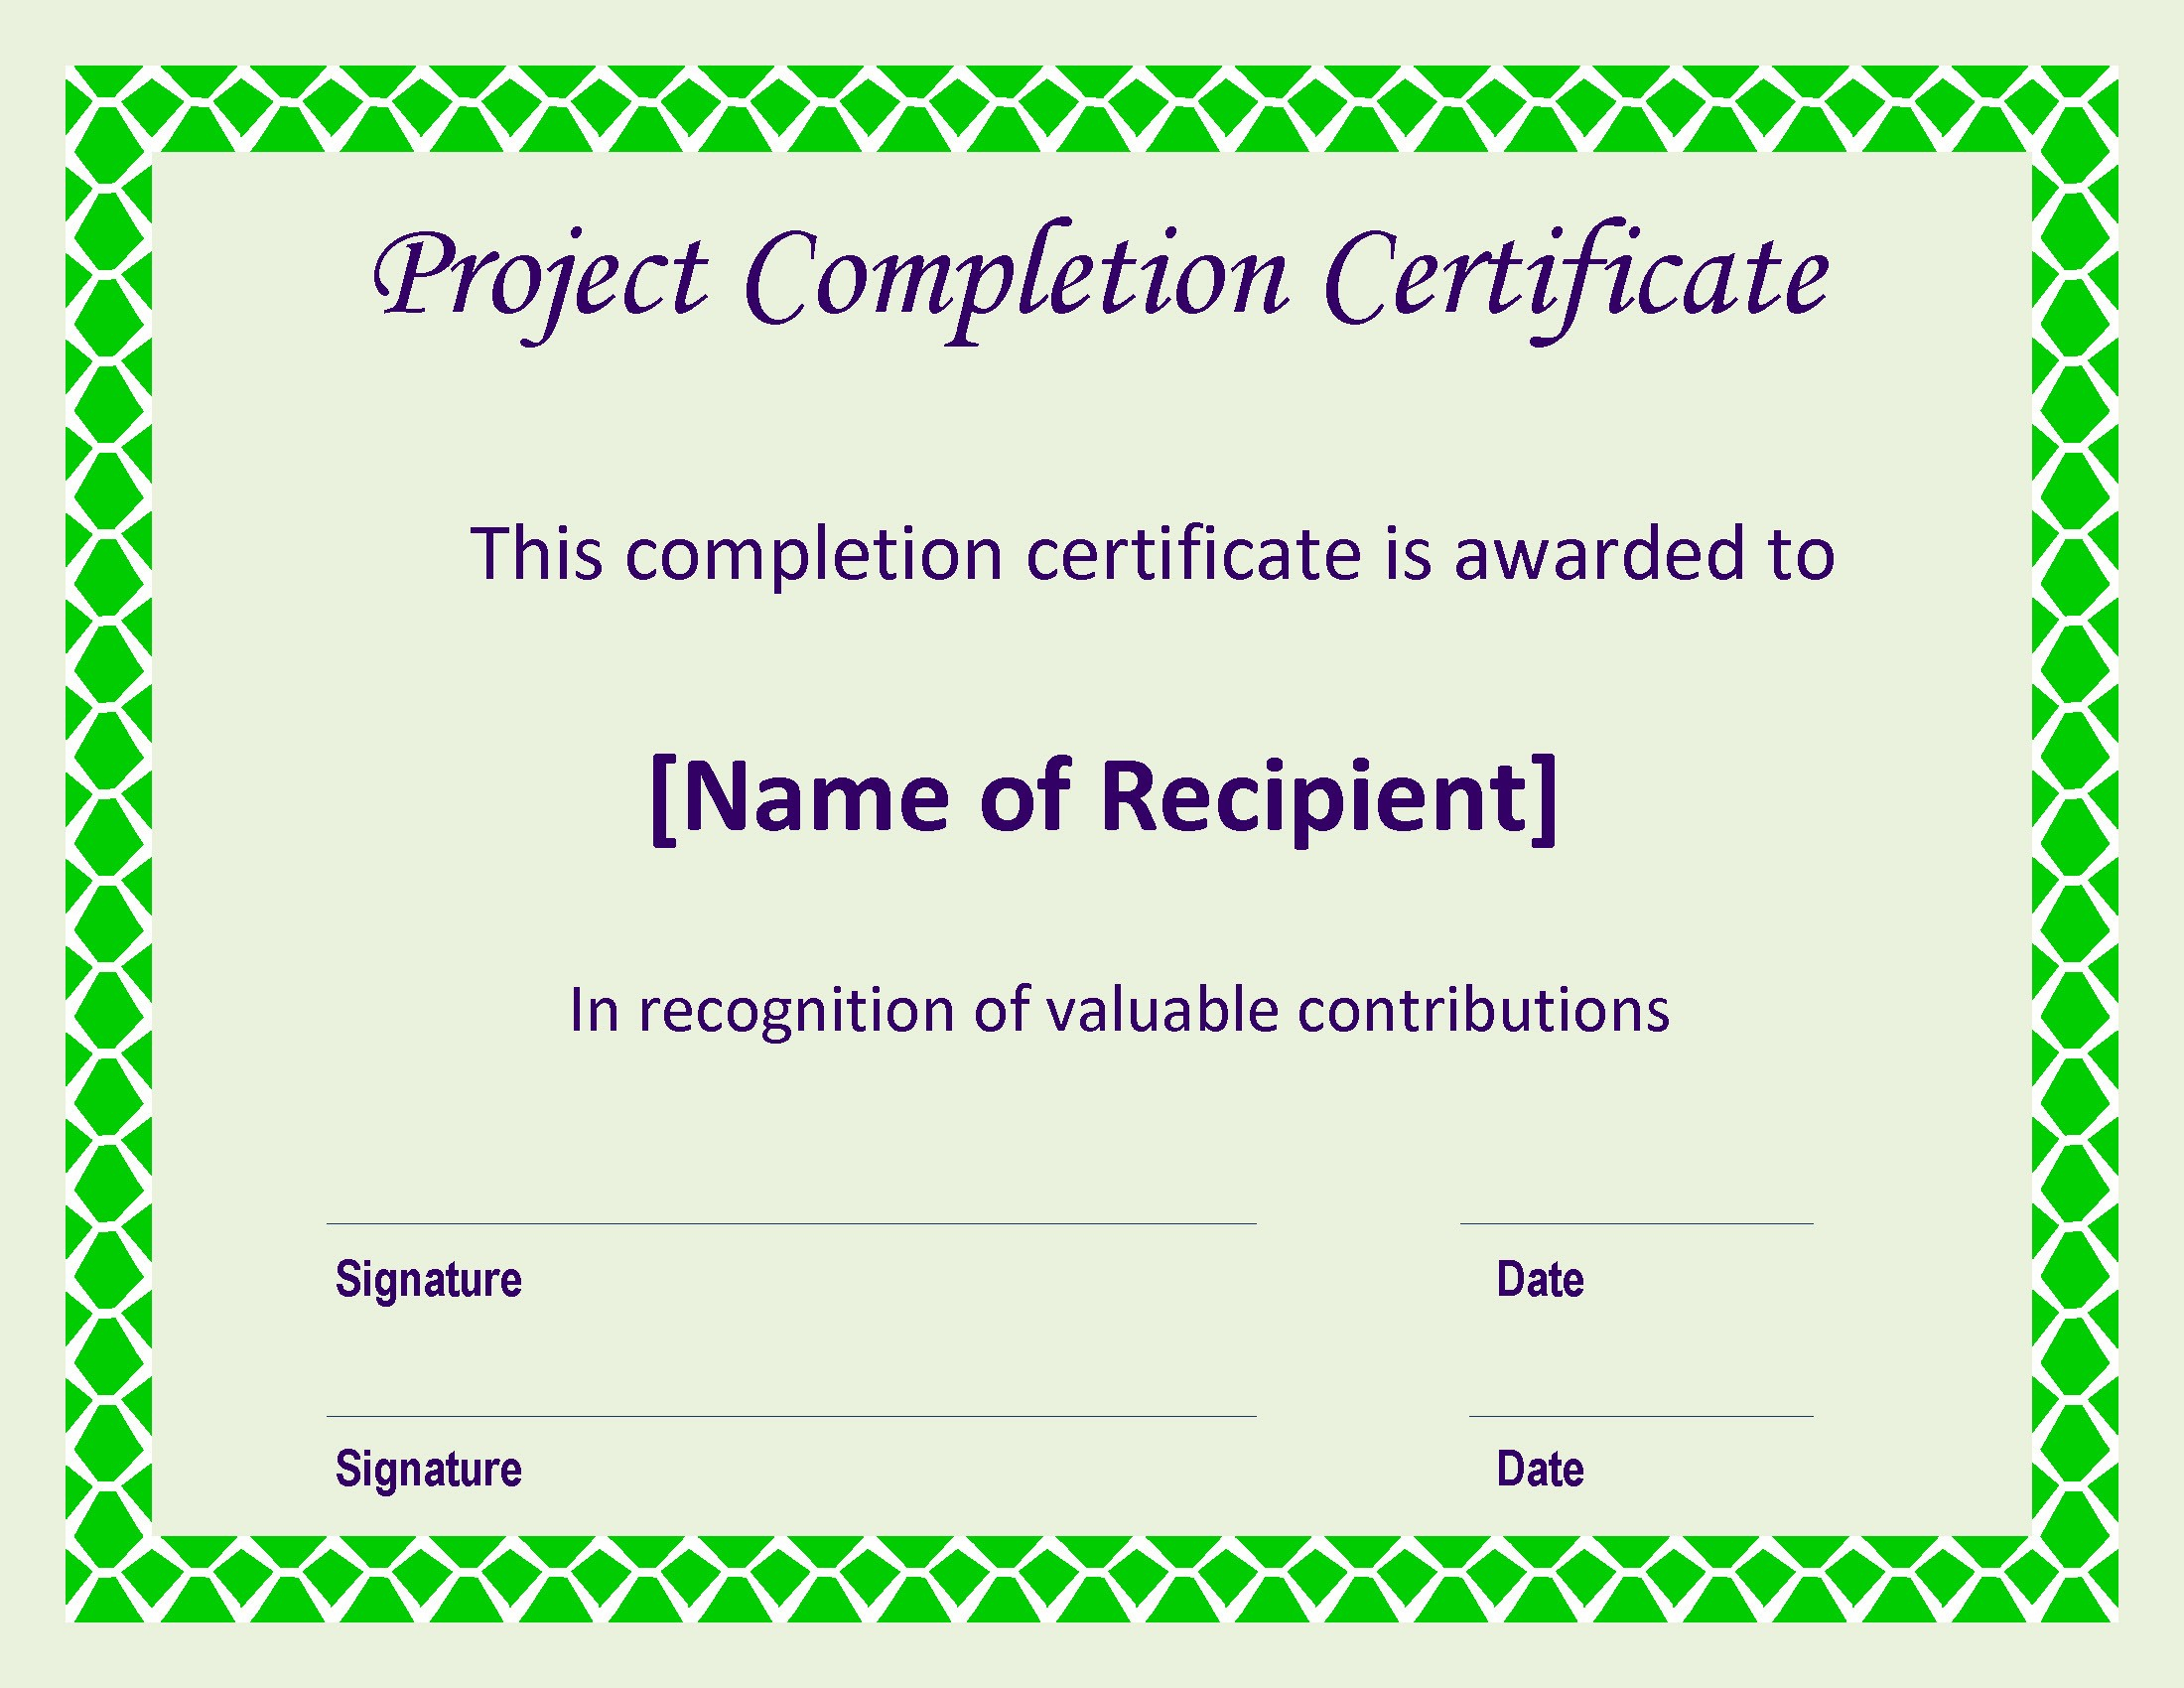 ❤️Free Sample Certificate of Project Templates❤️ For Certificate Template For Project Completion